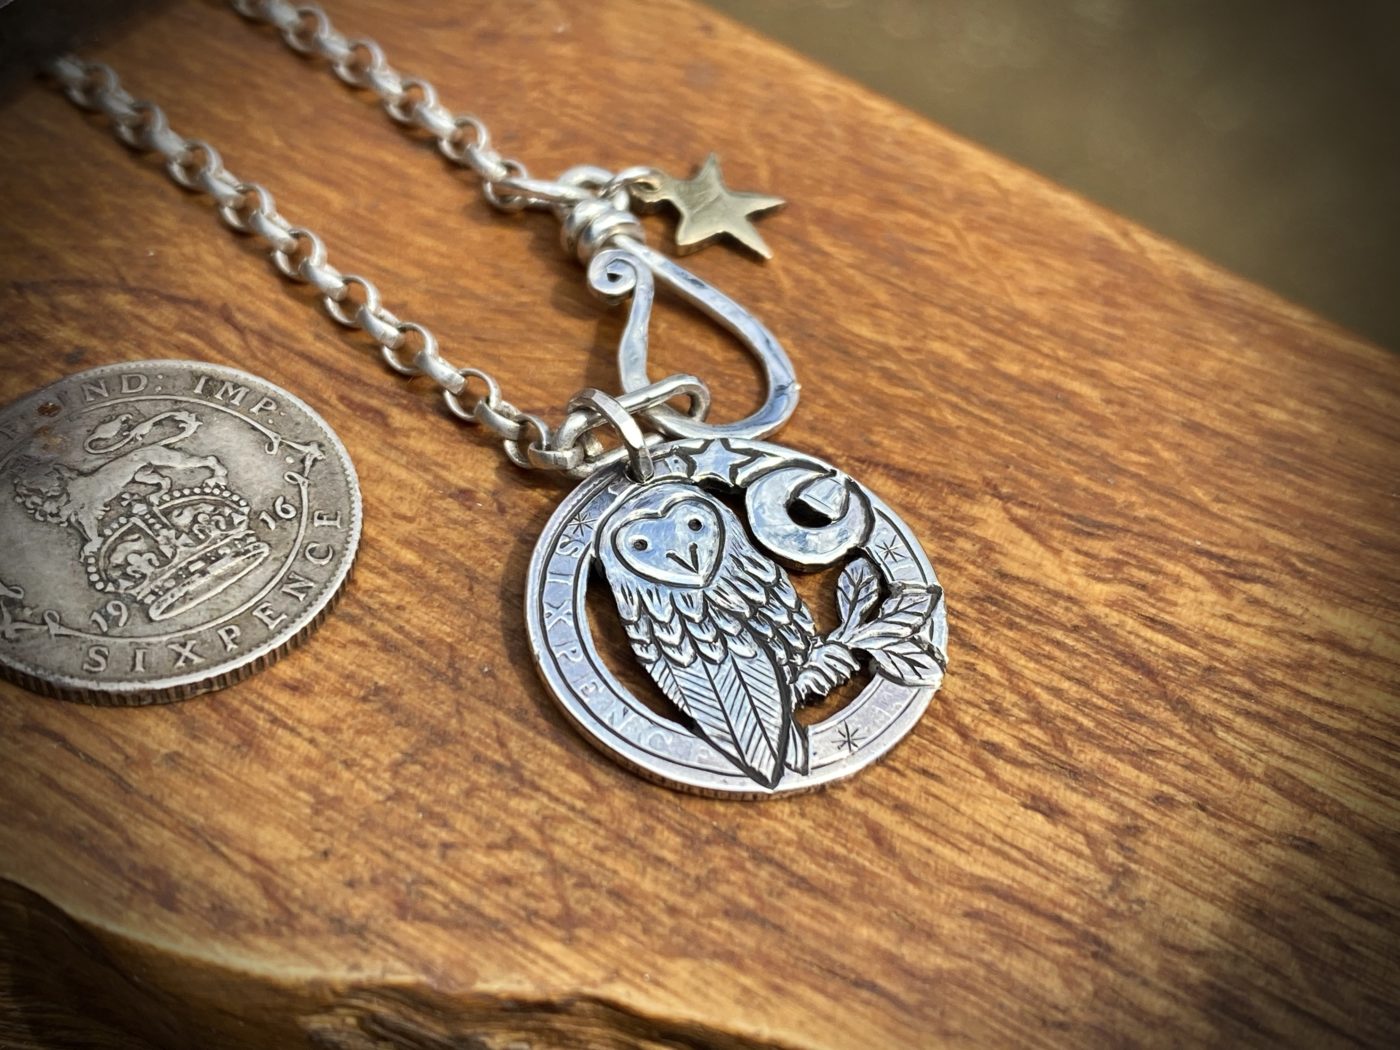 Handcrafted and upcycled silver sixpence coin owl pendant necklace